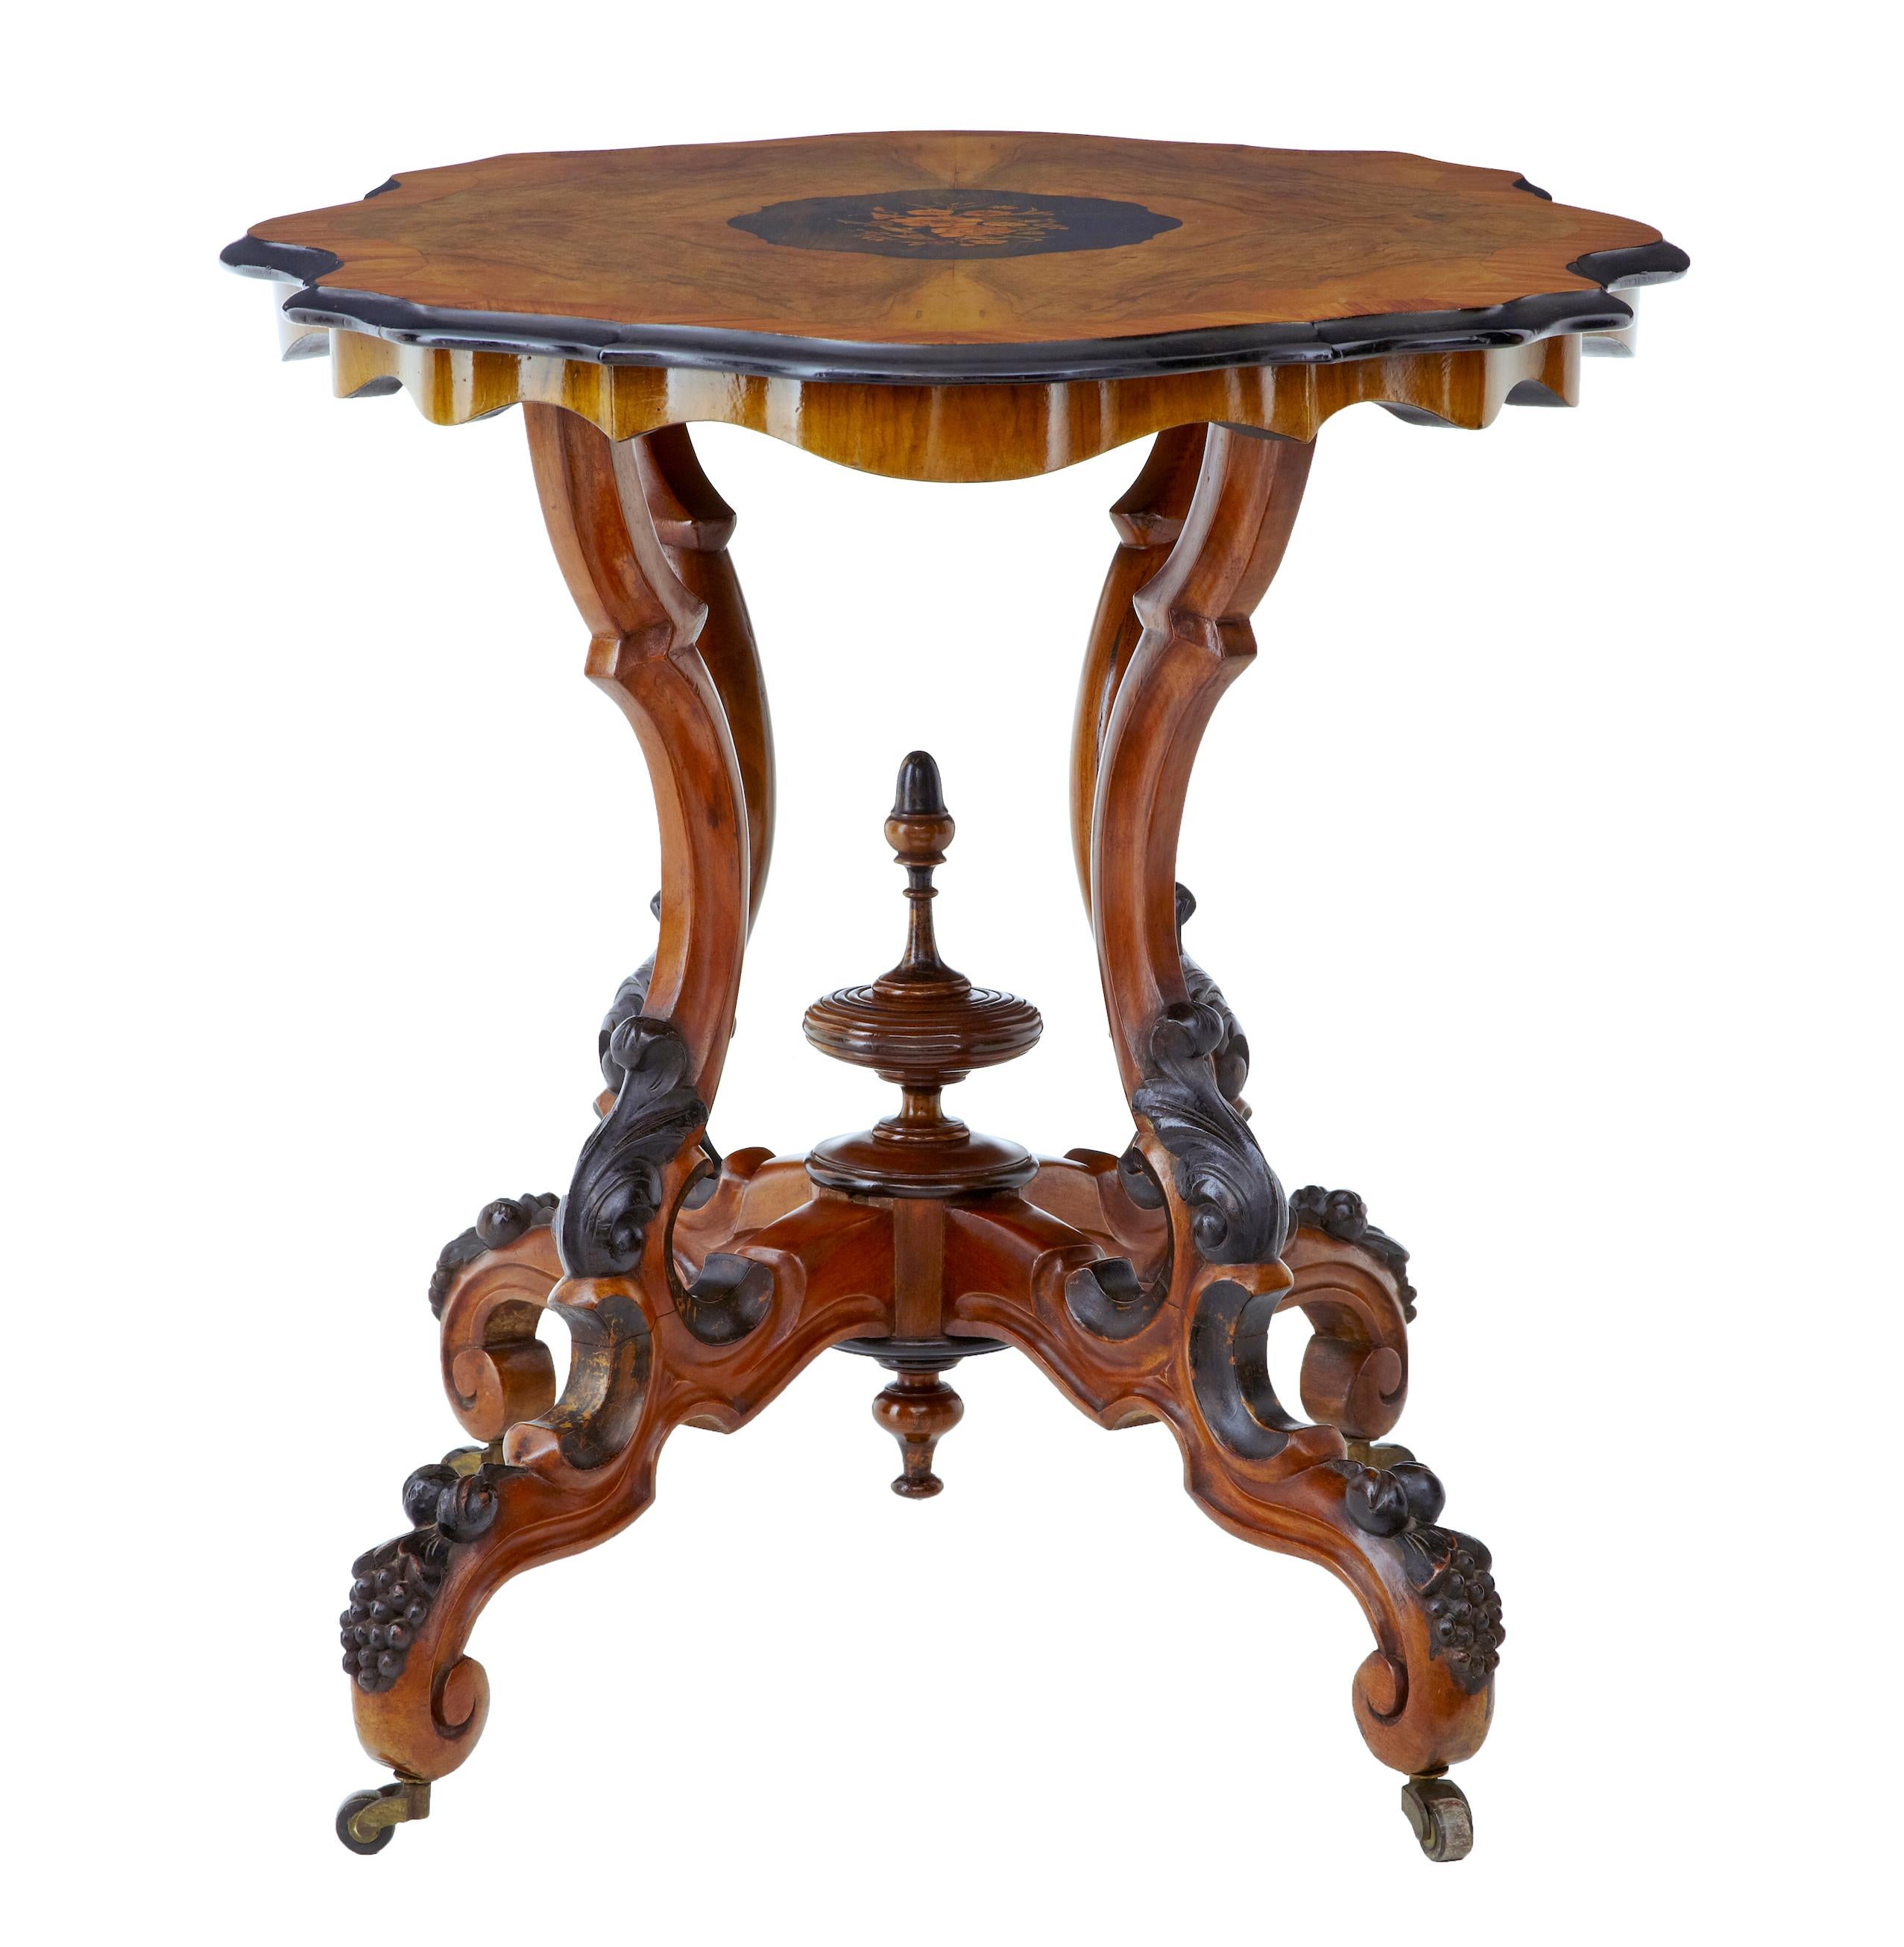 Fine quality walnut inlaid occasional table, circa 1870. Central inlaid floral section, using birch and walnuts veneers. Walnut top crossbanded in satinwood with ebonised shaped edging. Stands on 4 shaped legs with applied acanthus leaves and fruit